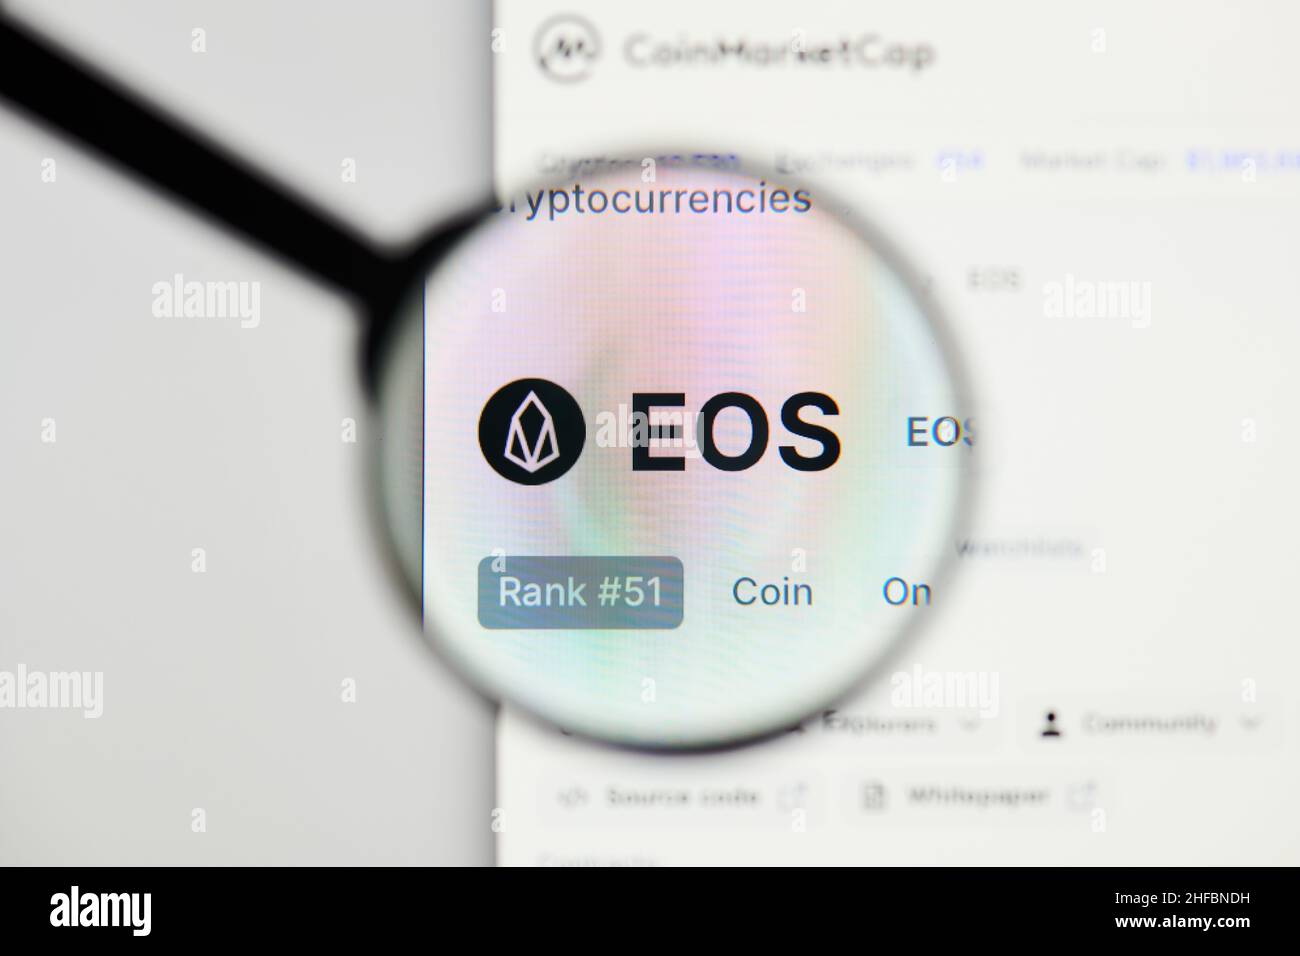 Milan, Italy - January 11, 2022: eos - EOS website's hp.  eos, EOS coin logo visible through a loope. Defi, ntf, cryptocurrency concepts illustrative Stock Photo